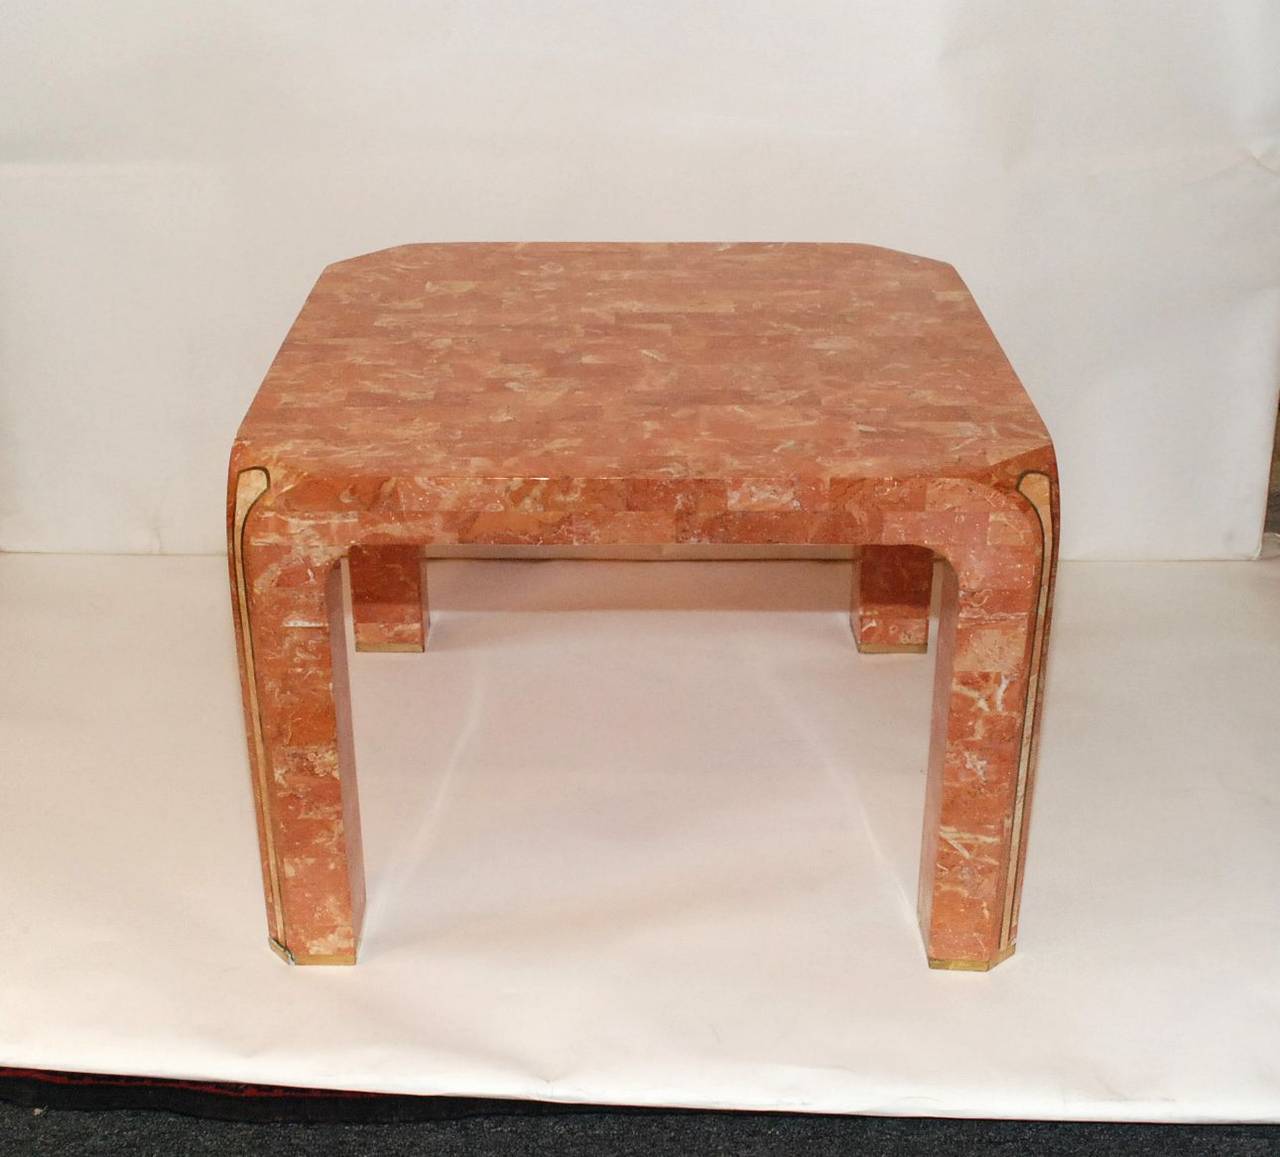 A stunning Karl Springer tessellated marble finish side table. Each leg is accented with a brass inlay. Karl Springer Ltd suede or leather label under the table.